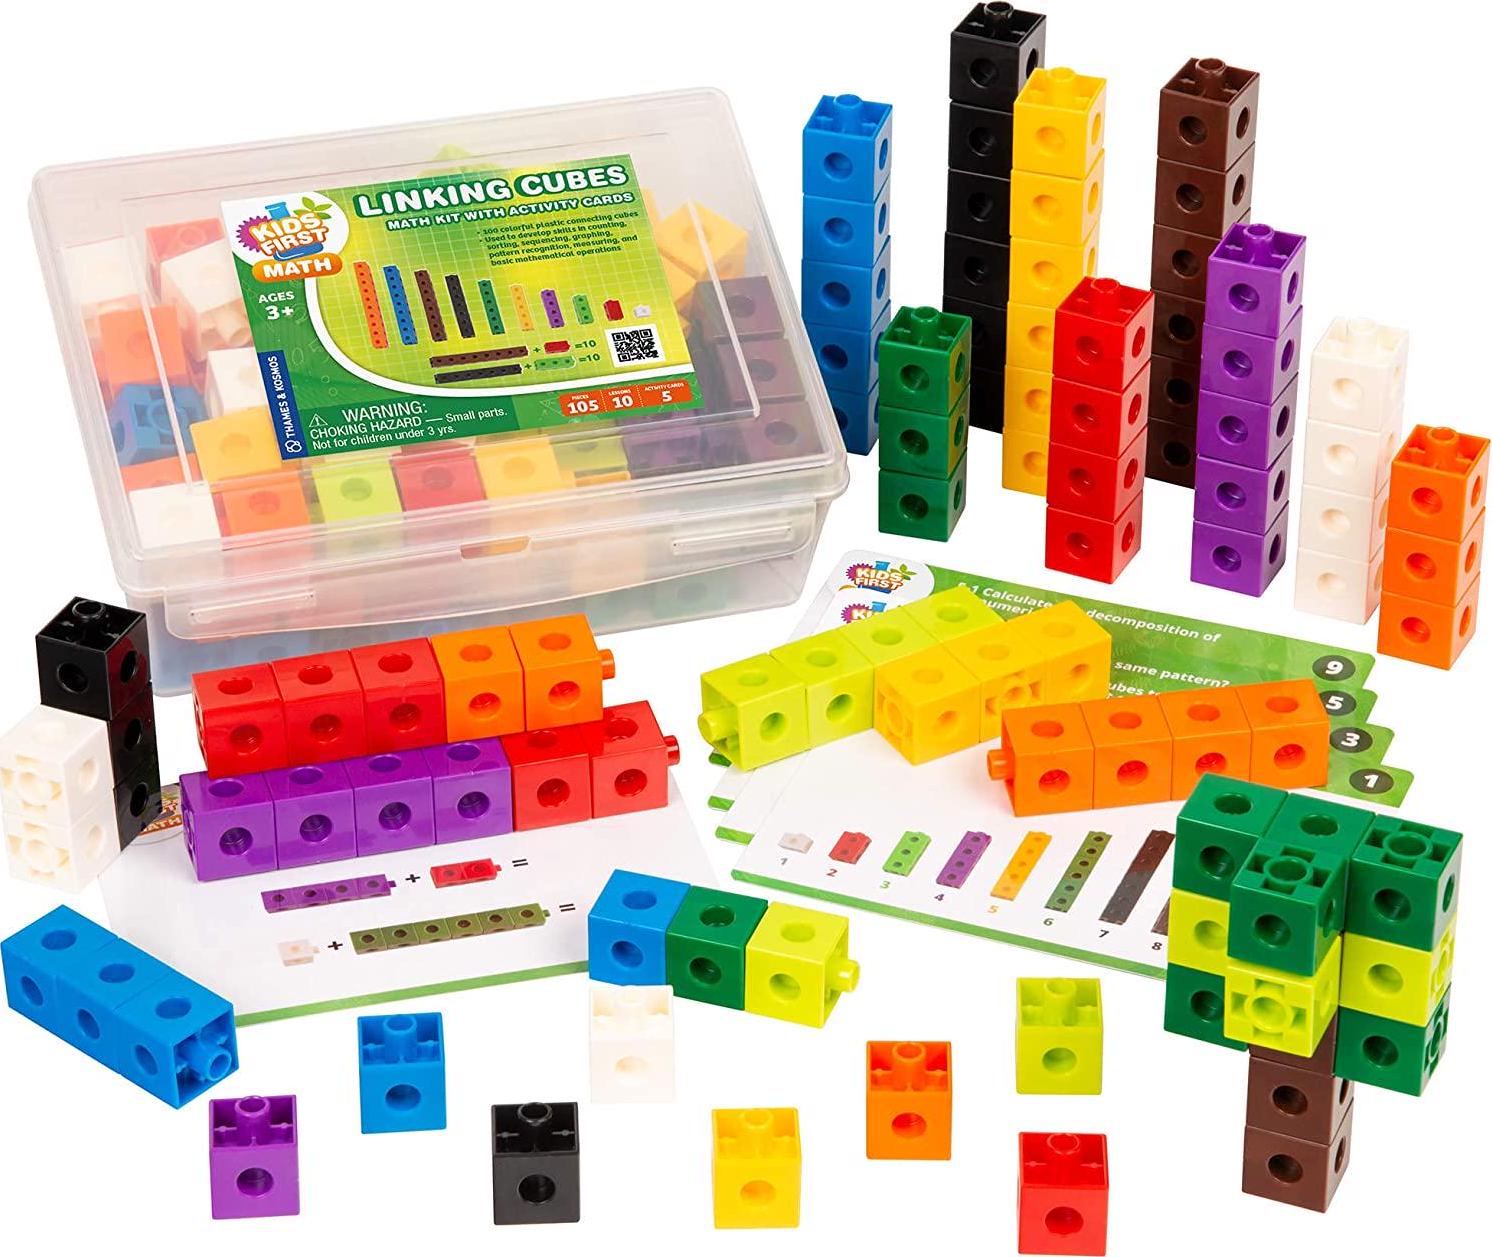 THAMES & KOSMOS, Kids First Math: 100 Linking Cubes Math Kit w/ Activity Cards | Develop Skills in Counting, Sorting, Sequencing, Graphing, Measuring | Visual Hands-on Math for at-Home or Classroom Learning Ages 3+